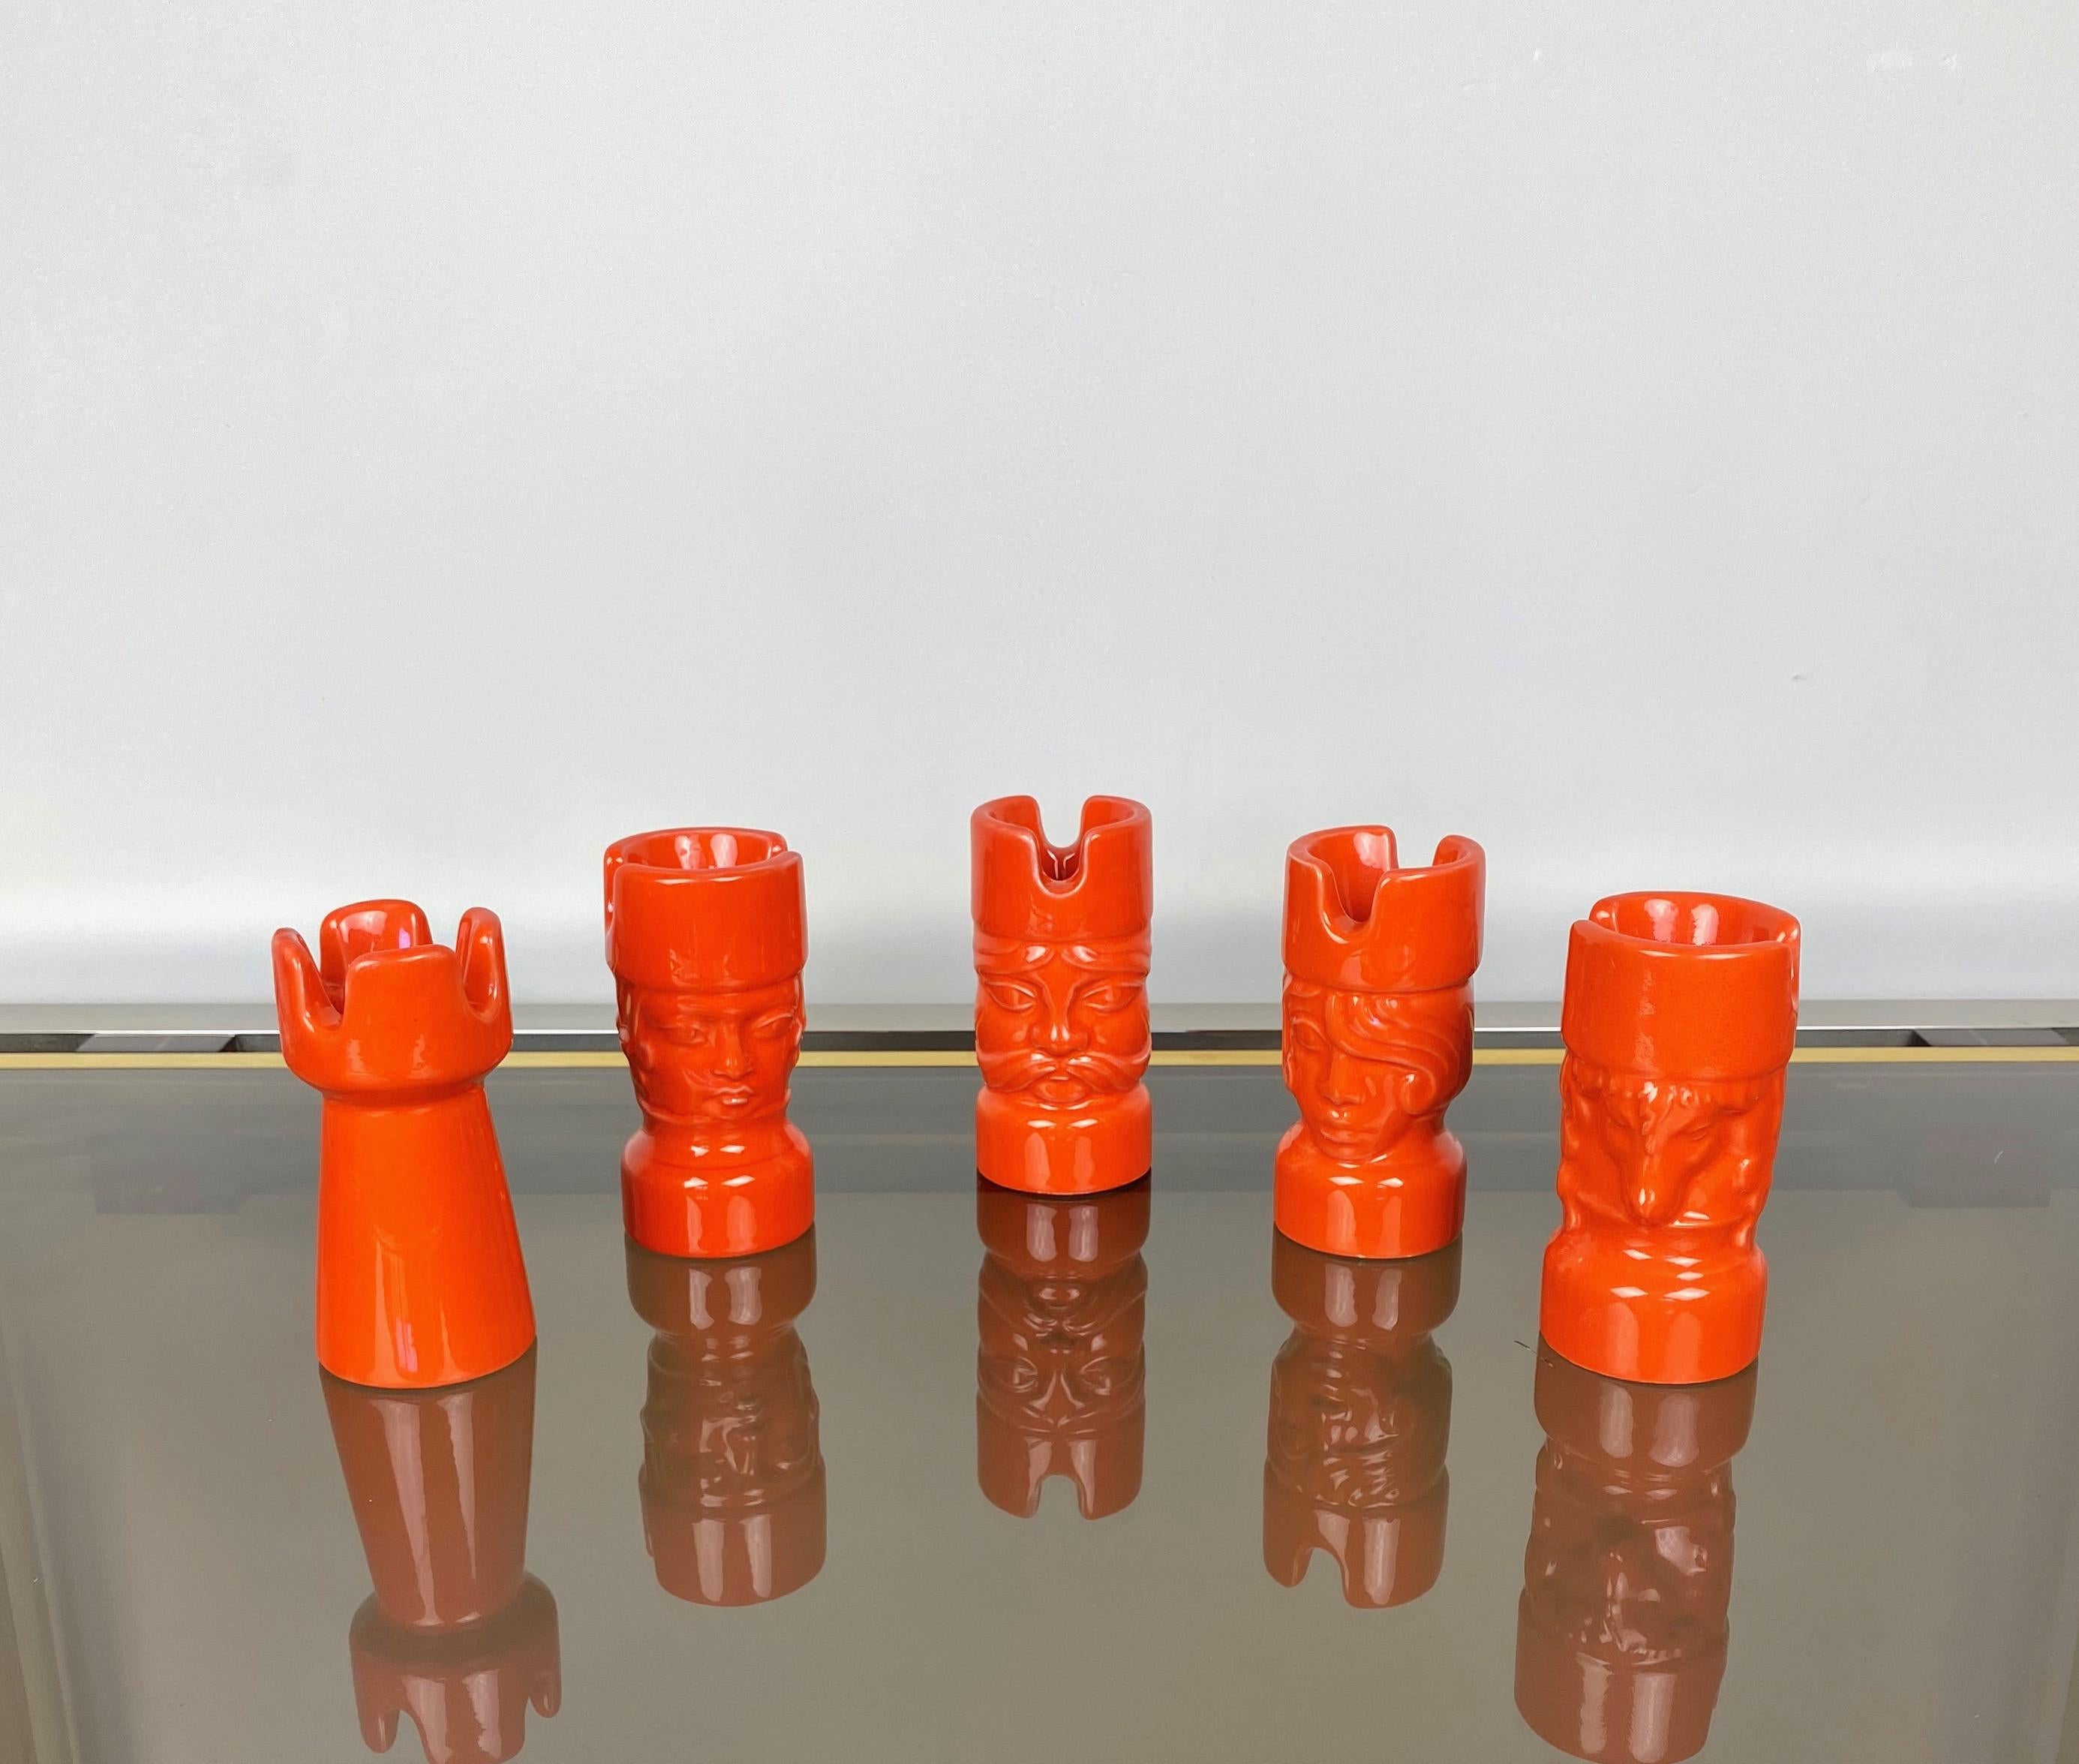 Mid-Century Modern Orange Ceramic Chess Pieces Sculpture by Il Picchio, Italy, 1970s For Sale